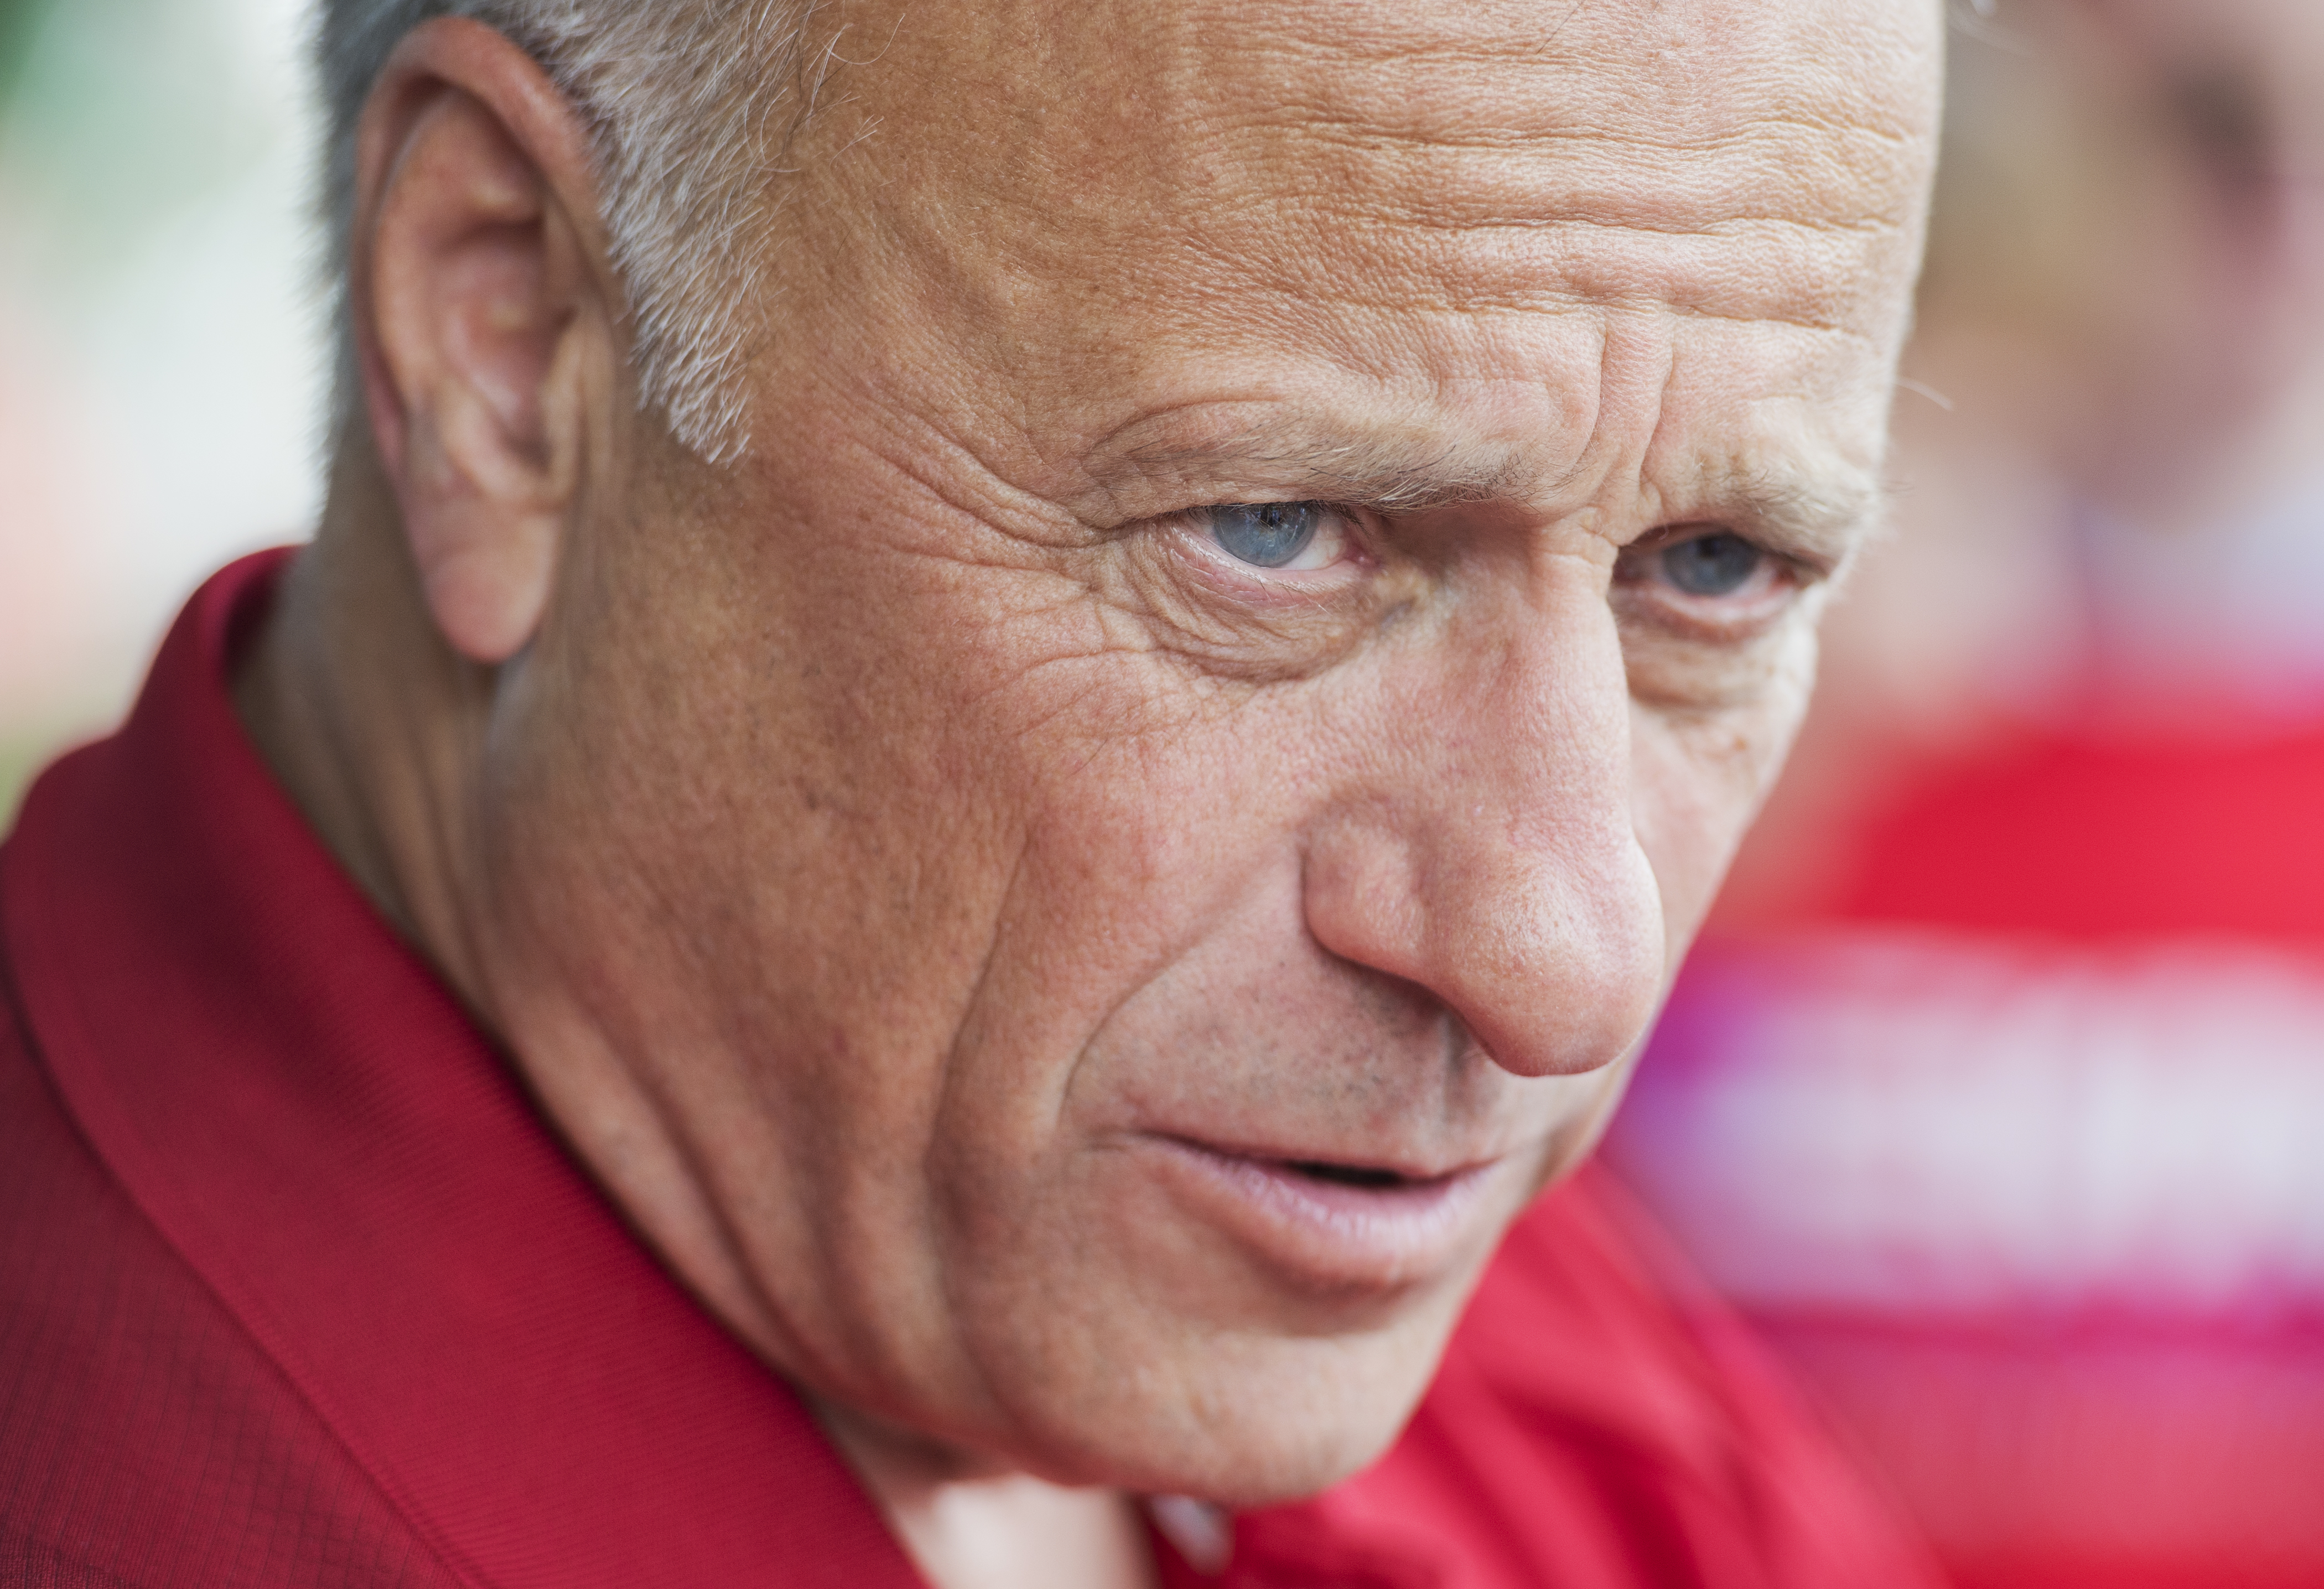 Rep. Steve King speaks with reporters at the 2014 Iowa State Fair in Des Moines, Iowa on Aug. 8, 2014. (Tom Williams—AP)